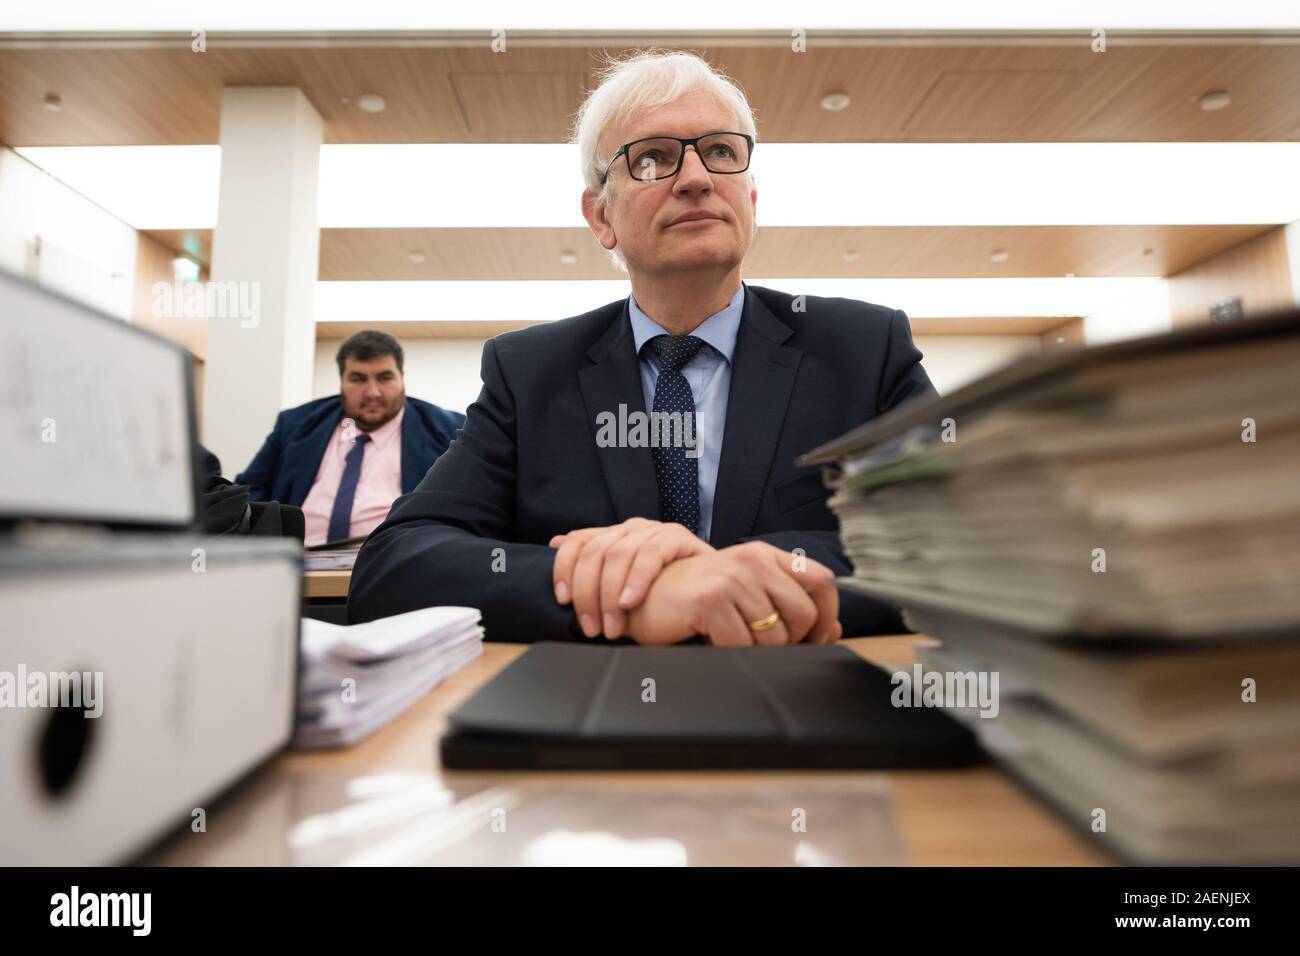 Kassel, Germany. 10th Dec, 2019. Jürgen Resch (front), Managing Director of Deutsche Umwelthilfe, sits between files in the Hessian Administrative Court before the trial begins. In an appeal against an action brought by Deutsche Umwelthilfe, the court is dealing with possible bans on diesel driving in the city of Frankfurt am Main. Credit: Swen Pförtner/dpa/Alamy Live News Stock Photo